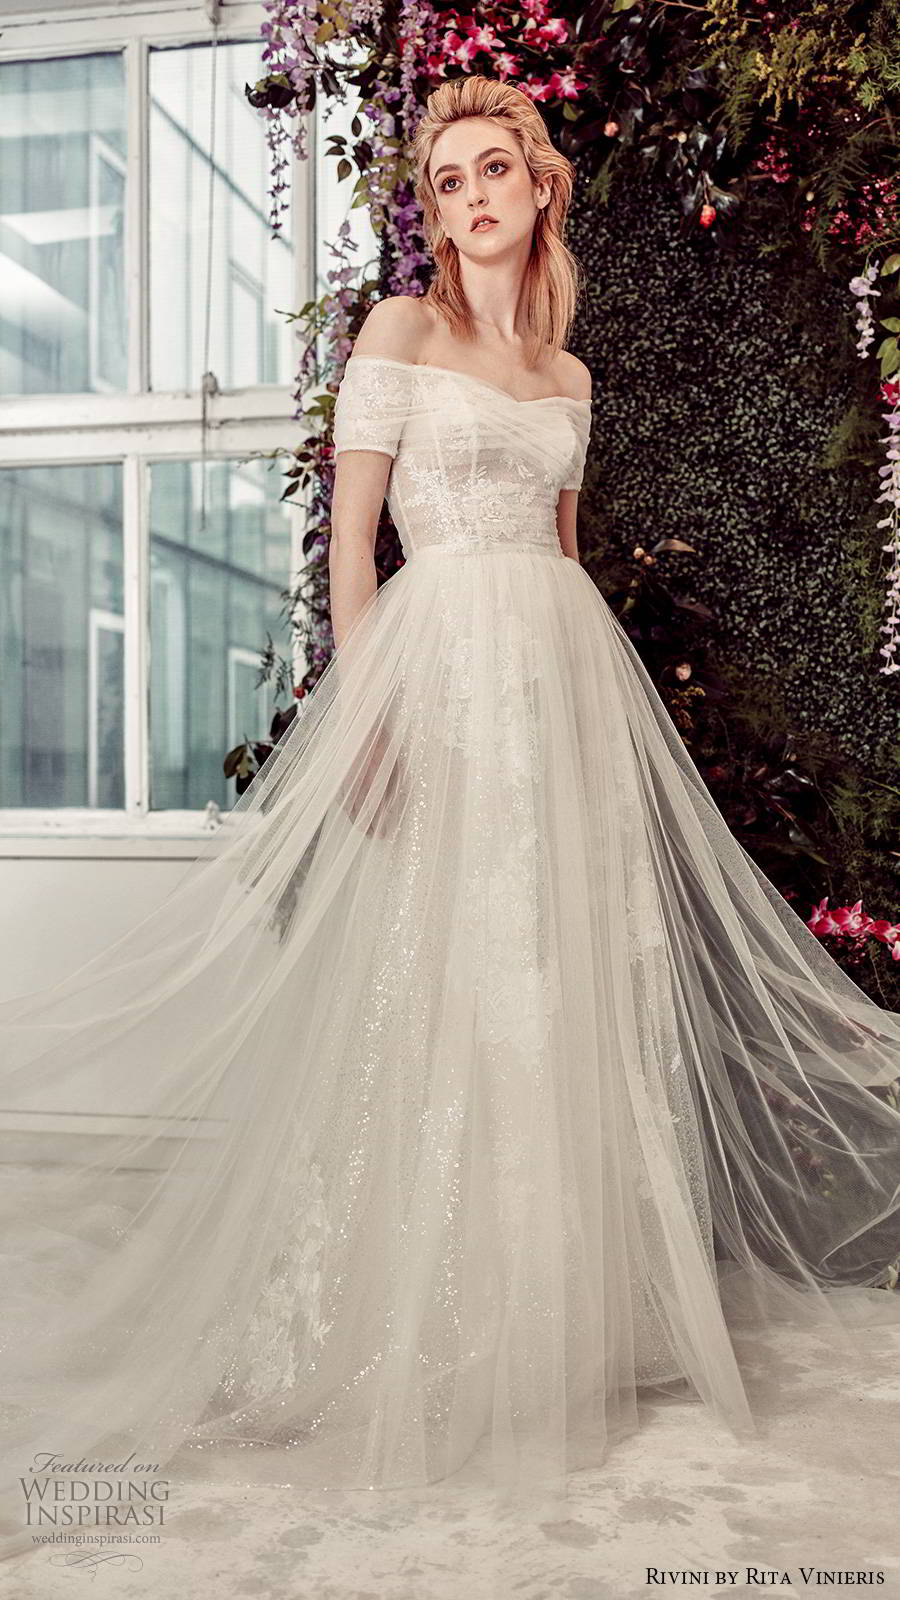 Short and Sweet Wedding Dresses are Perfect for Spring 2020